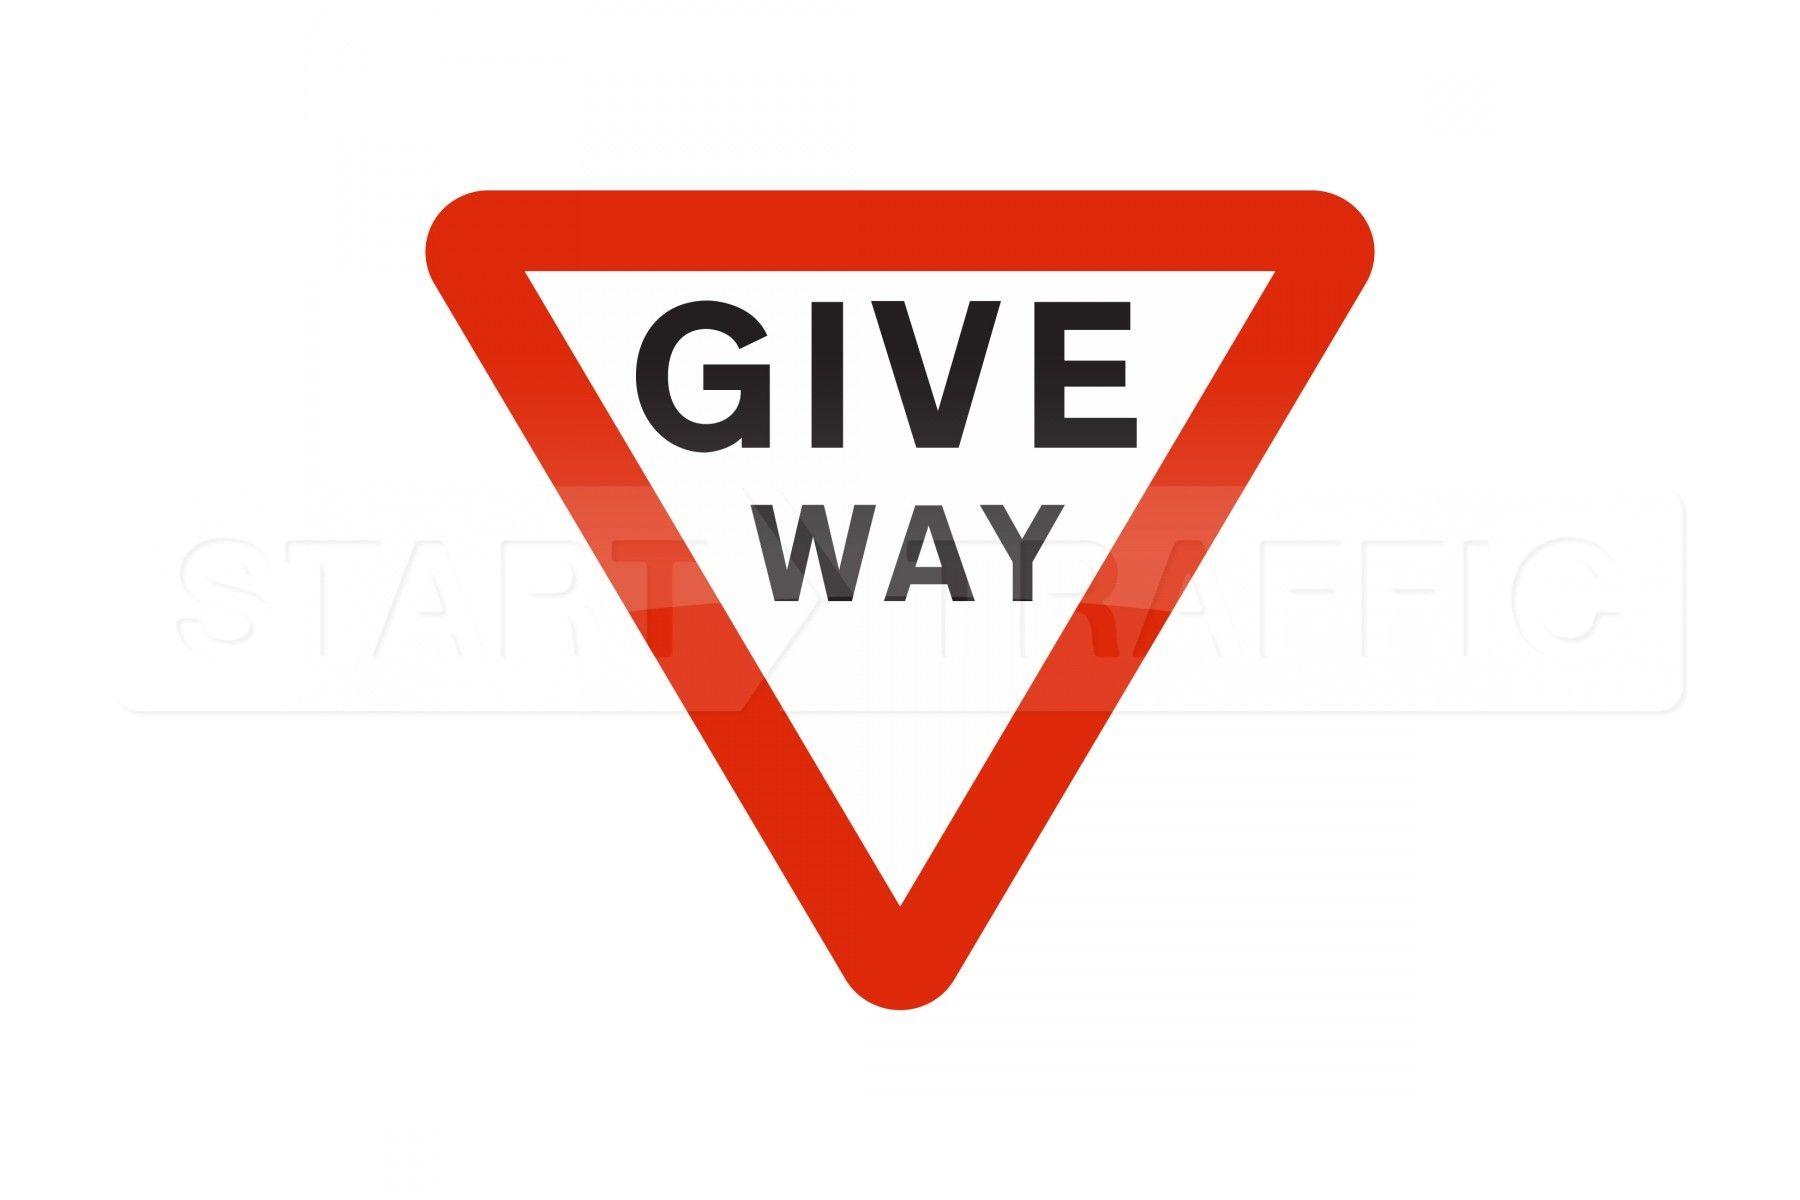 Red Triangle Face Logo - Give Way Road Sign triangular Metal Sign